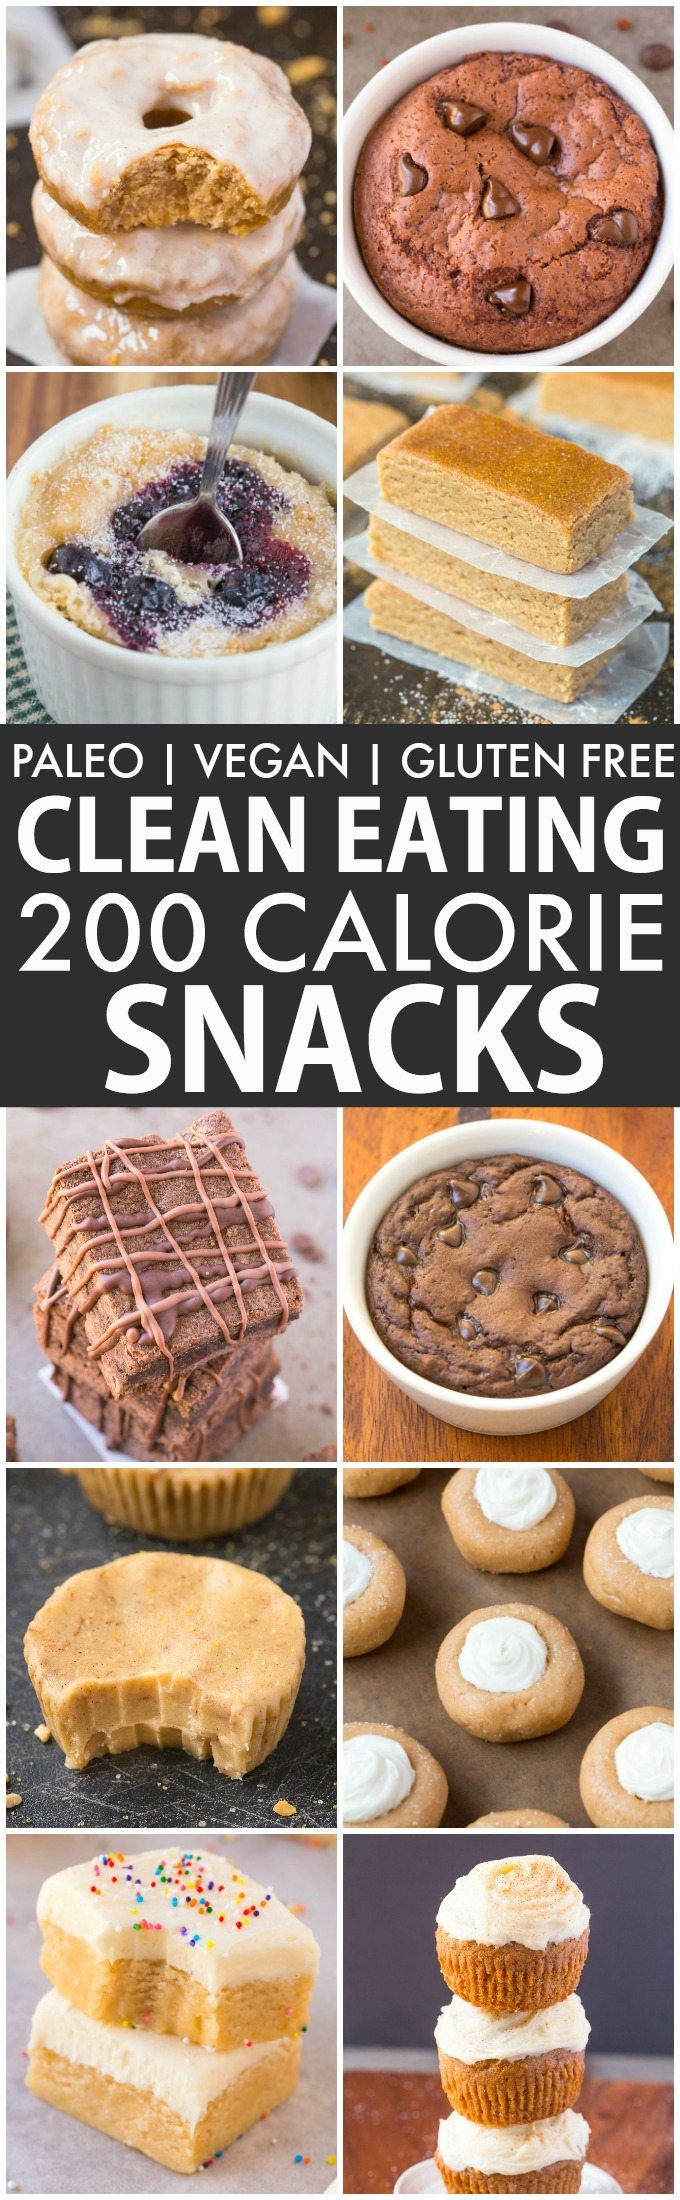 Healthy Clean Snacks
 15 Healthy Desserts and Snacks Under 200 Calories